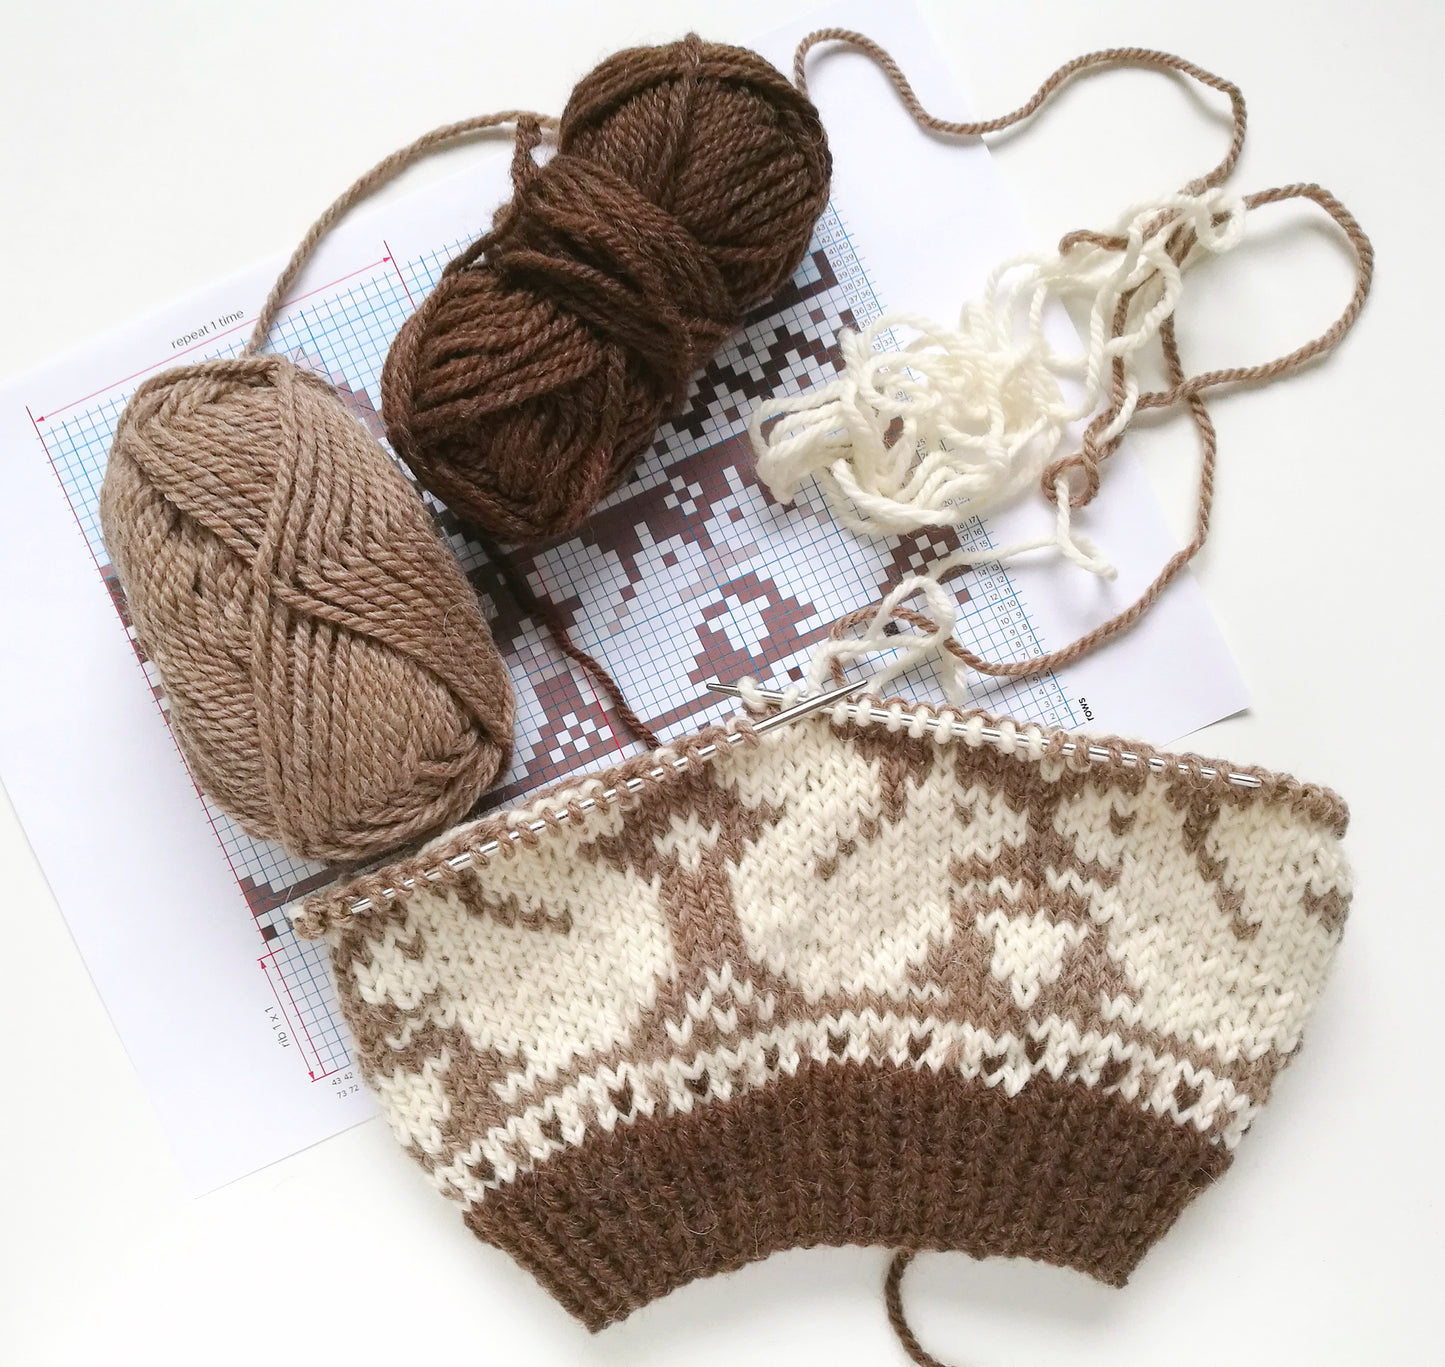 brown and white wool hand-knitted Fair Isle beanie hat in squirrel knitting pattern in progress with yarn skeins